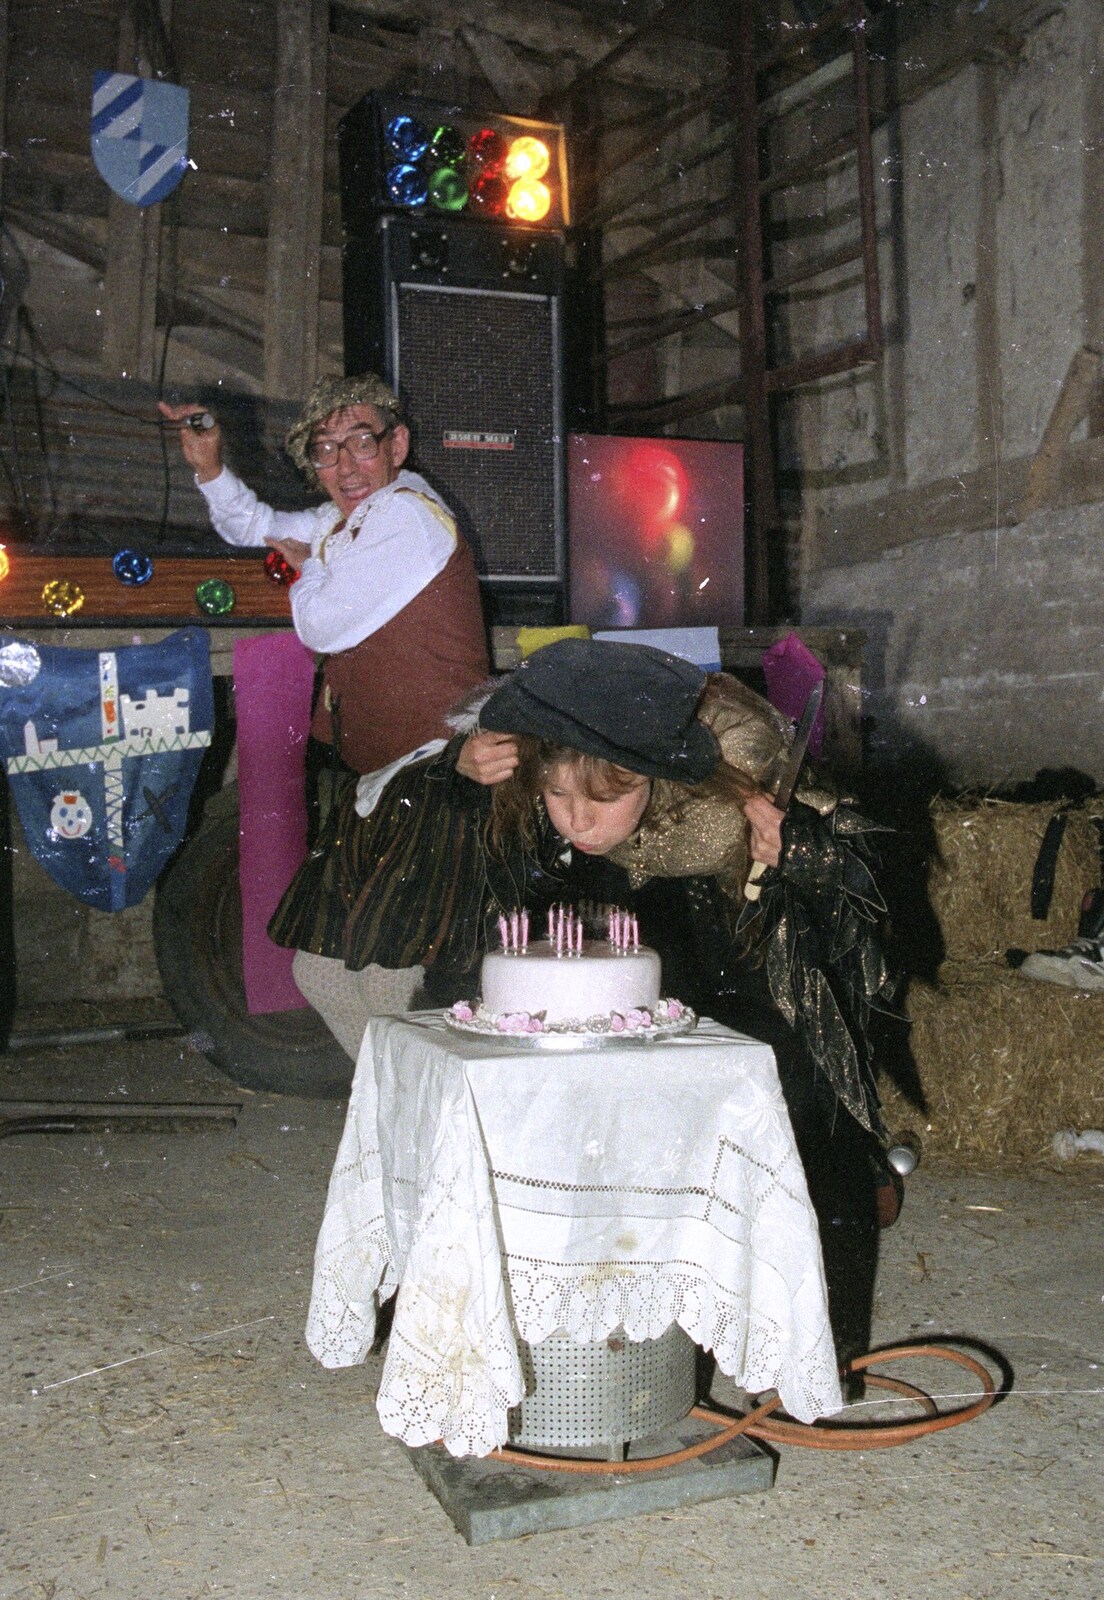 Candles are blown out from A Mediaeval Birthday Party, Starston, Norfolk - 27th July 1990